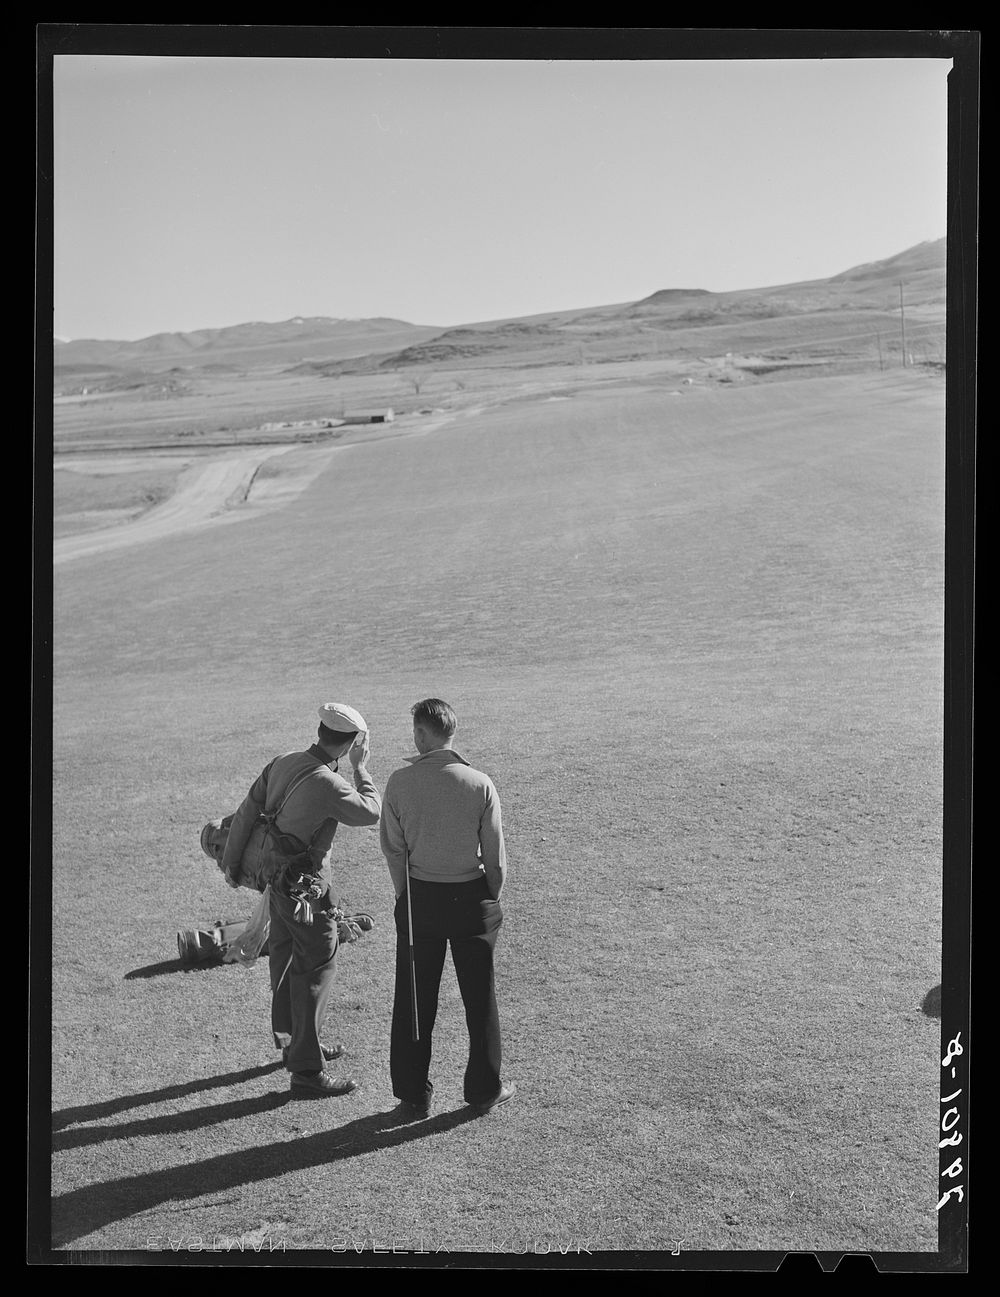 [Untitled photo, possibly related to: Golf course. Reno, Nevada]. Sourced from the Library of Congress.